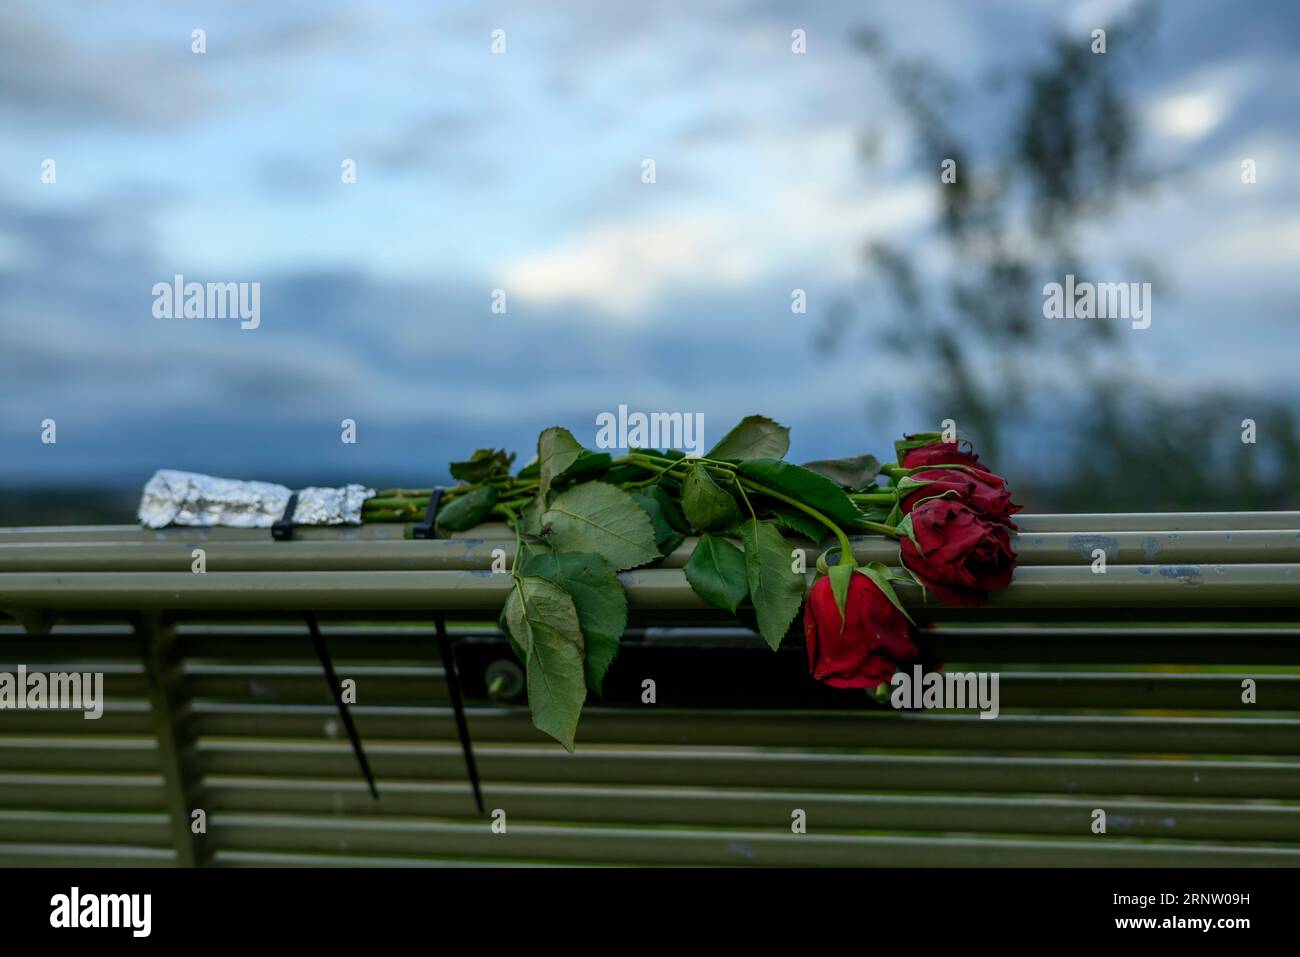 Bunch of red roses on a park bench Stock Photo